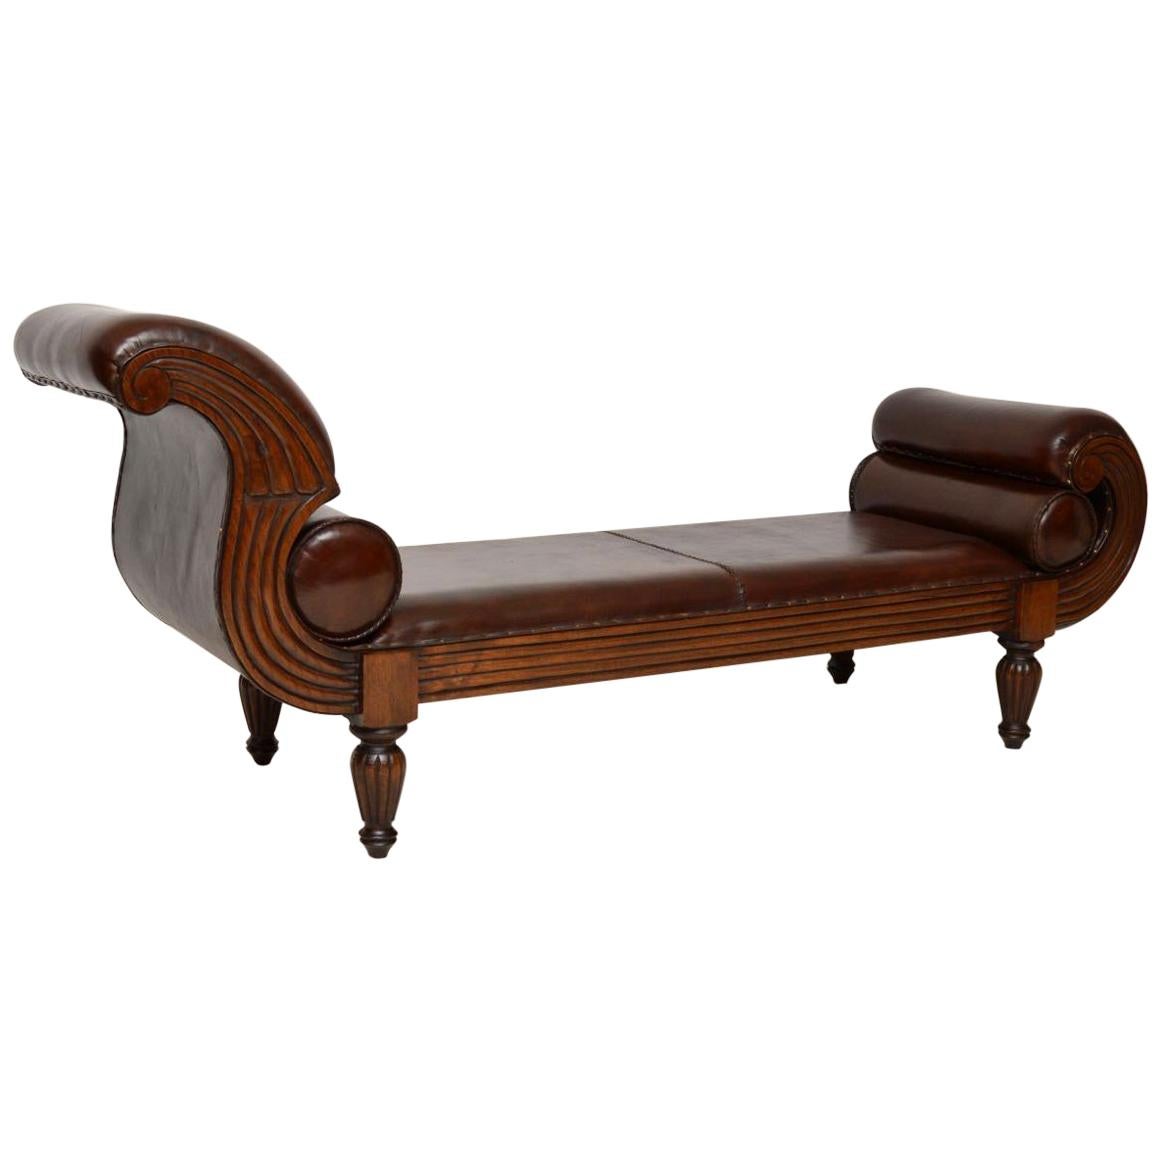 Antique Swedish Leather Chaise Lounge